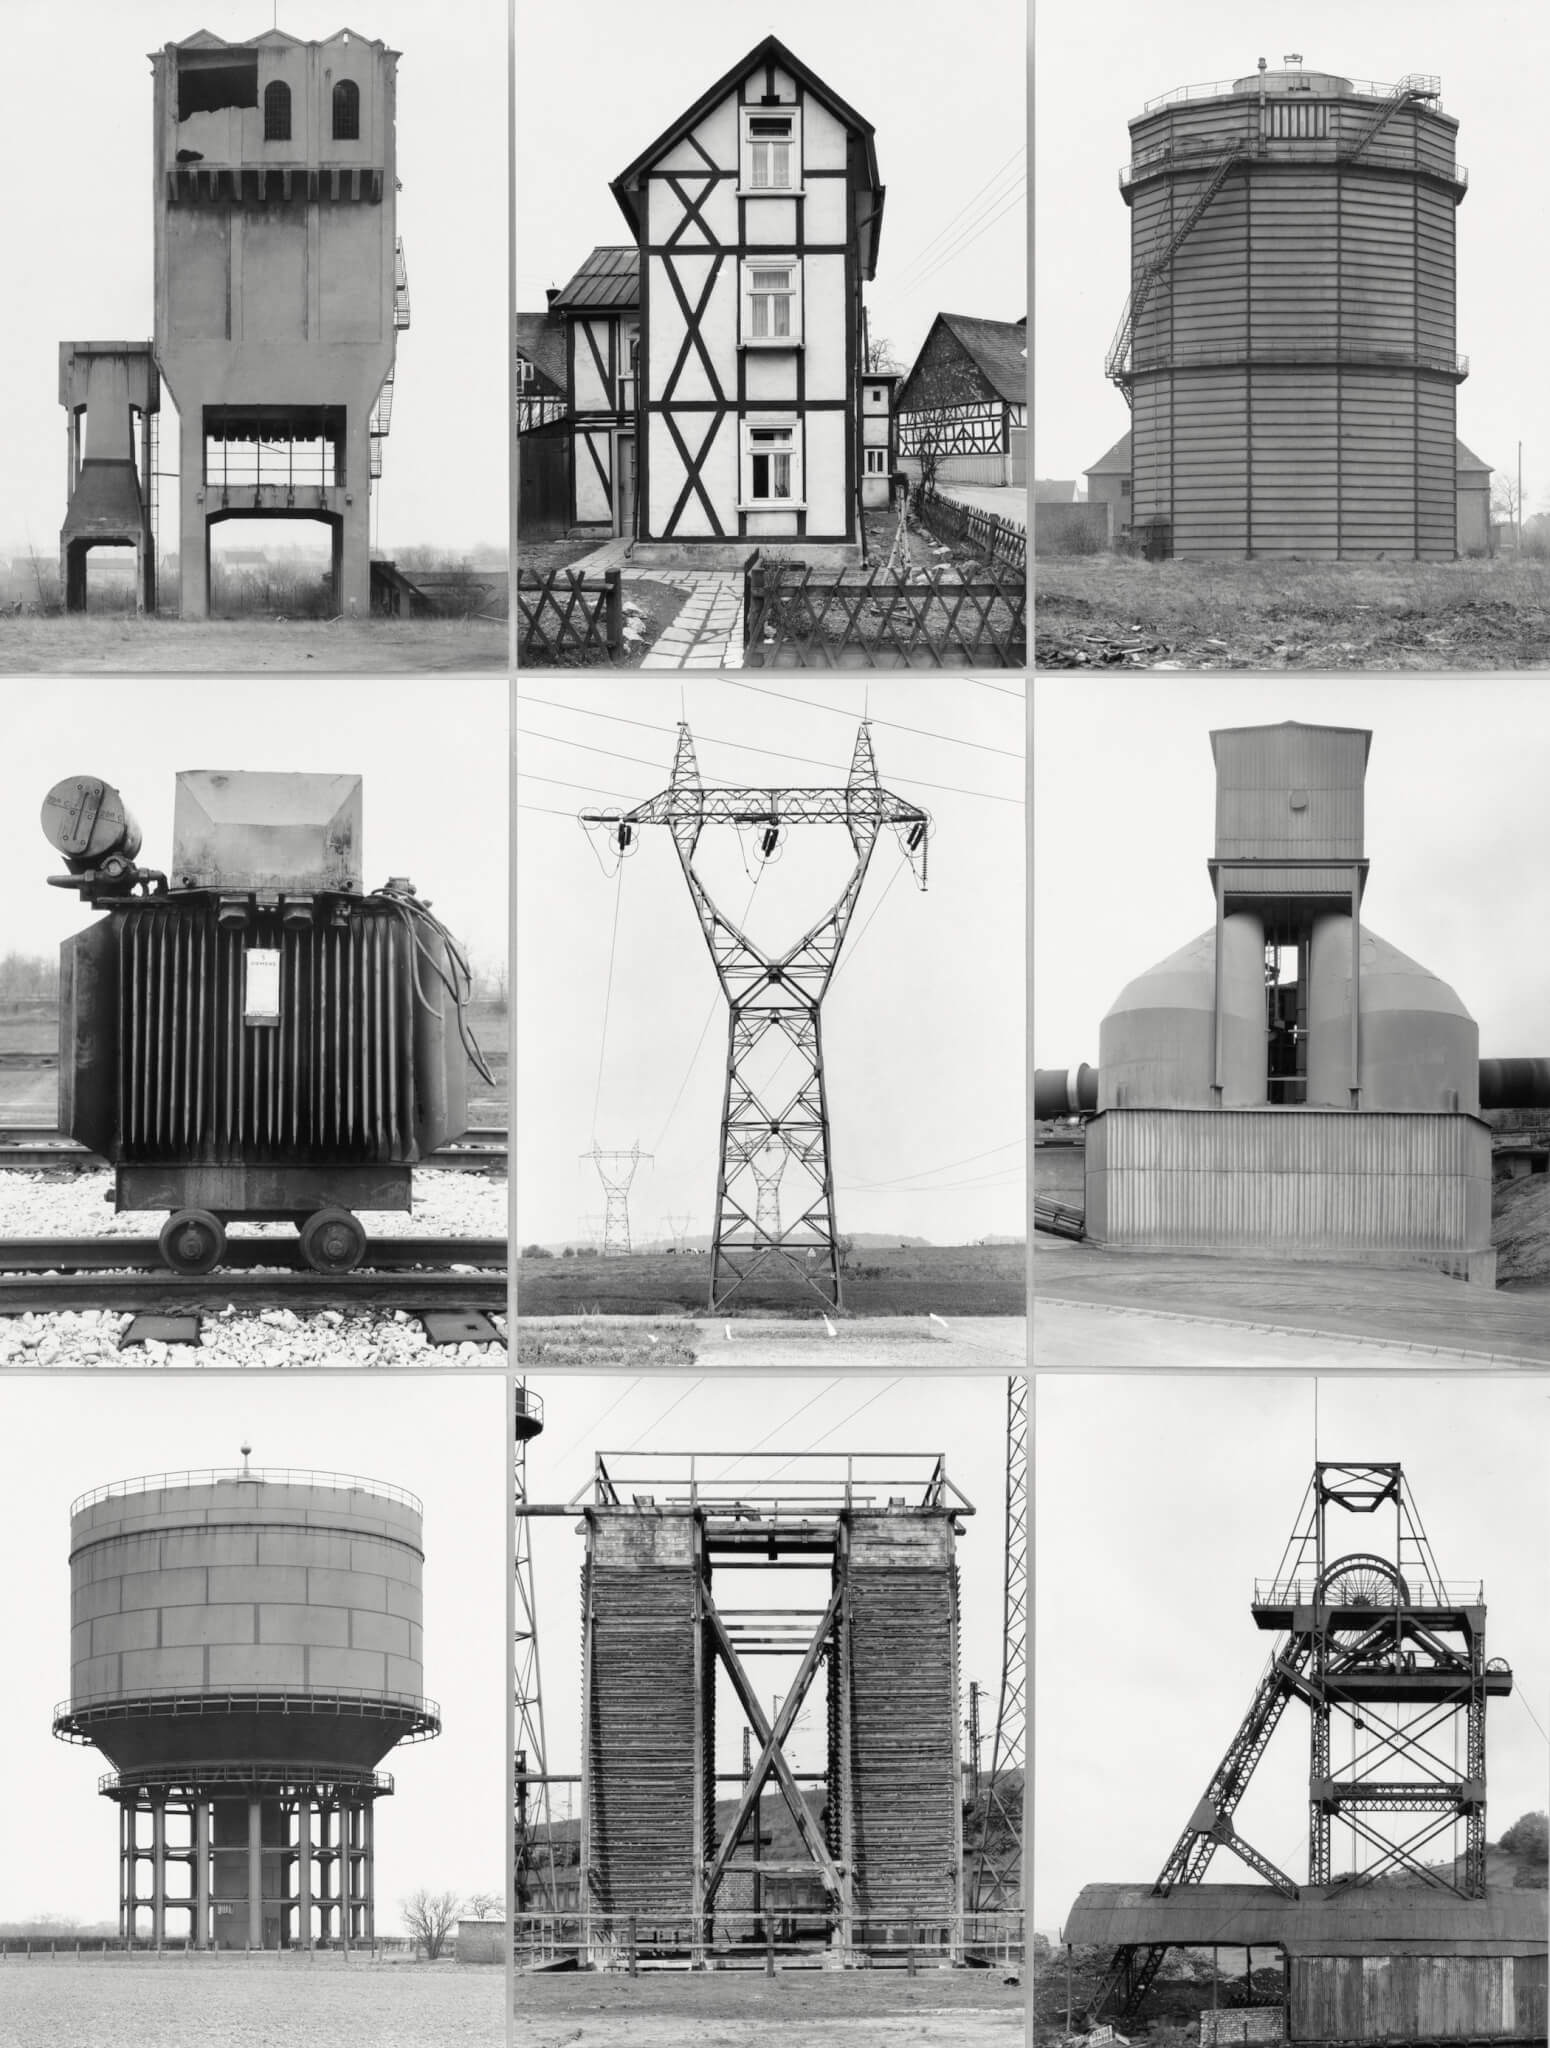 B&W photographic of different industrial structures